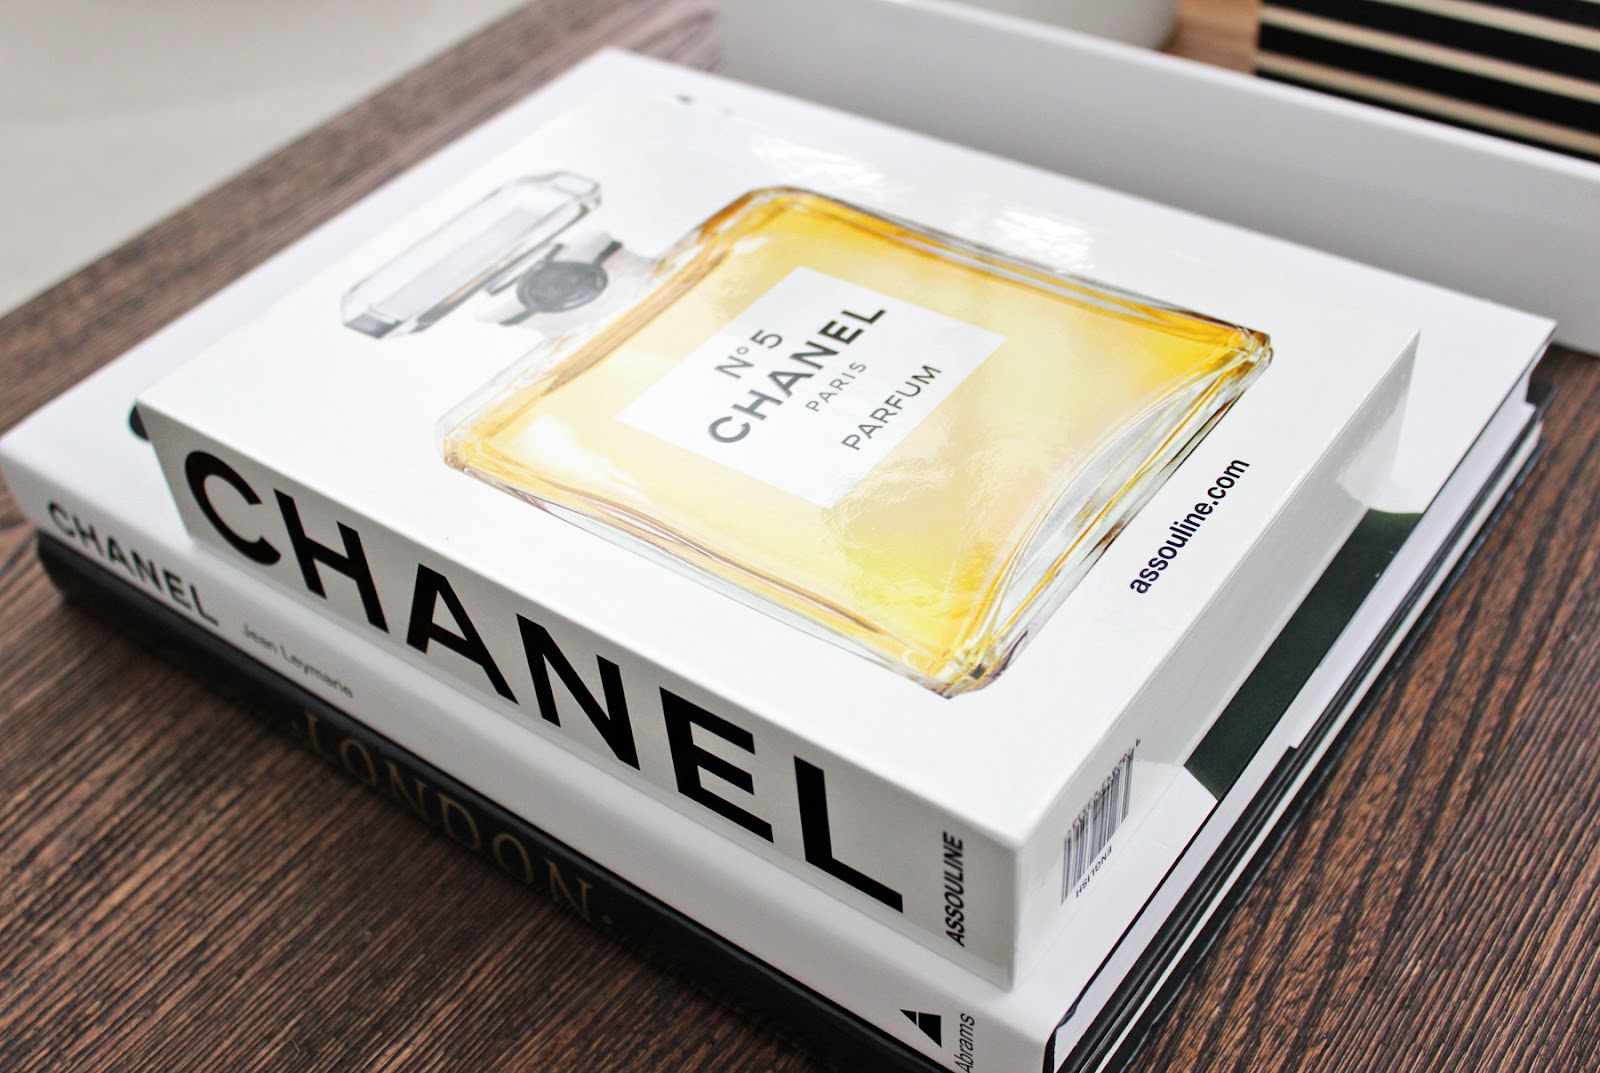 Abrams Chanel No. 5 Boxed Book Set Hard Cover Perfect Coffee Table